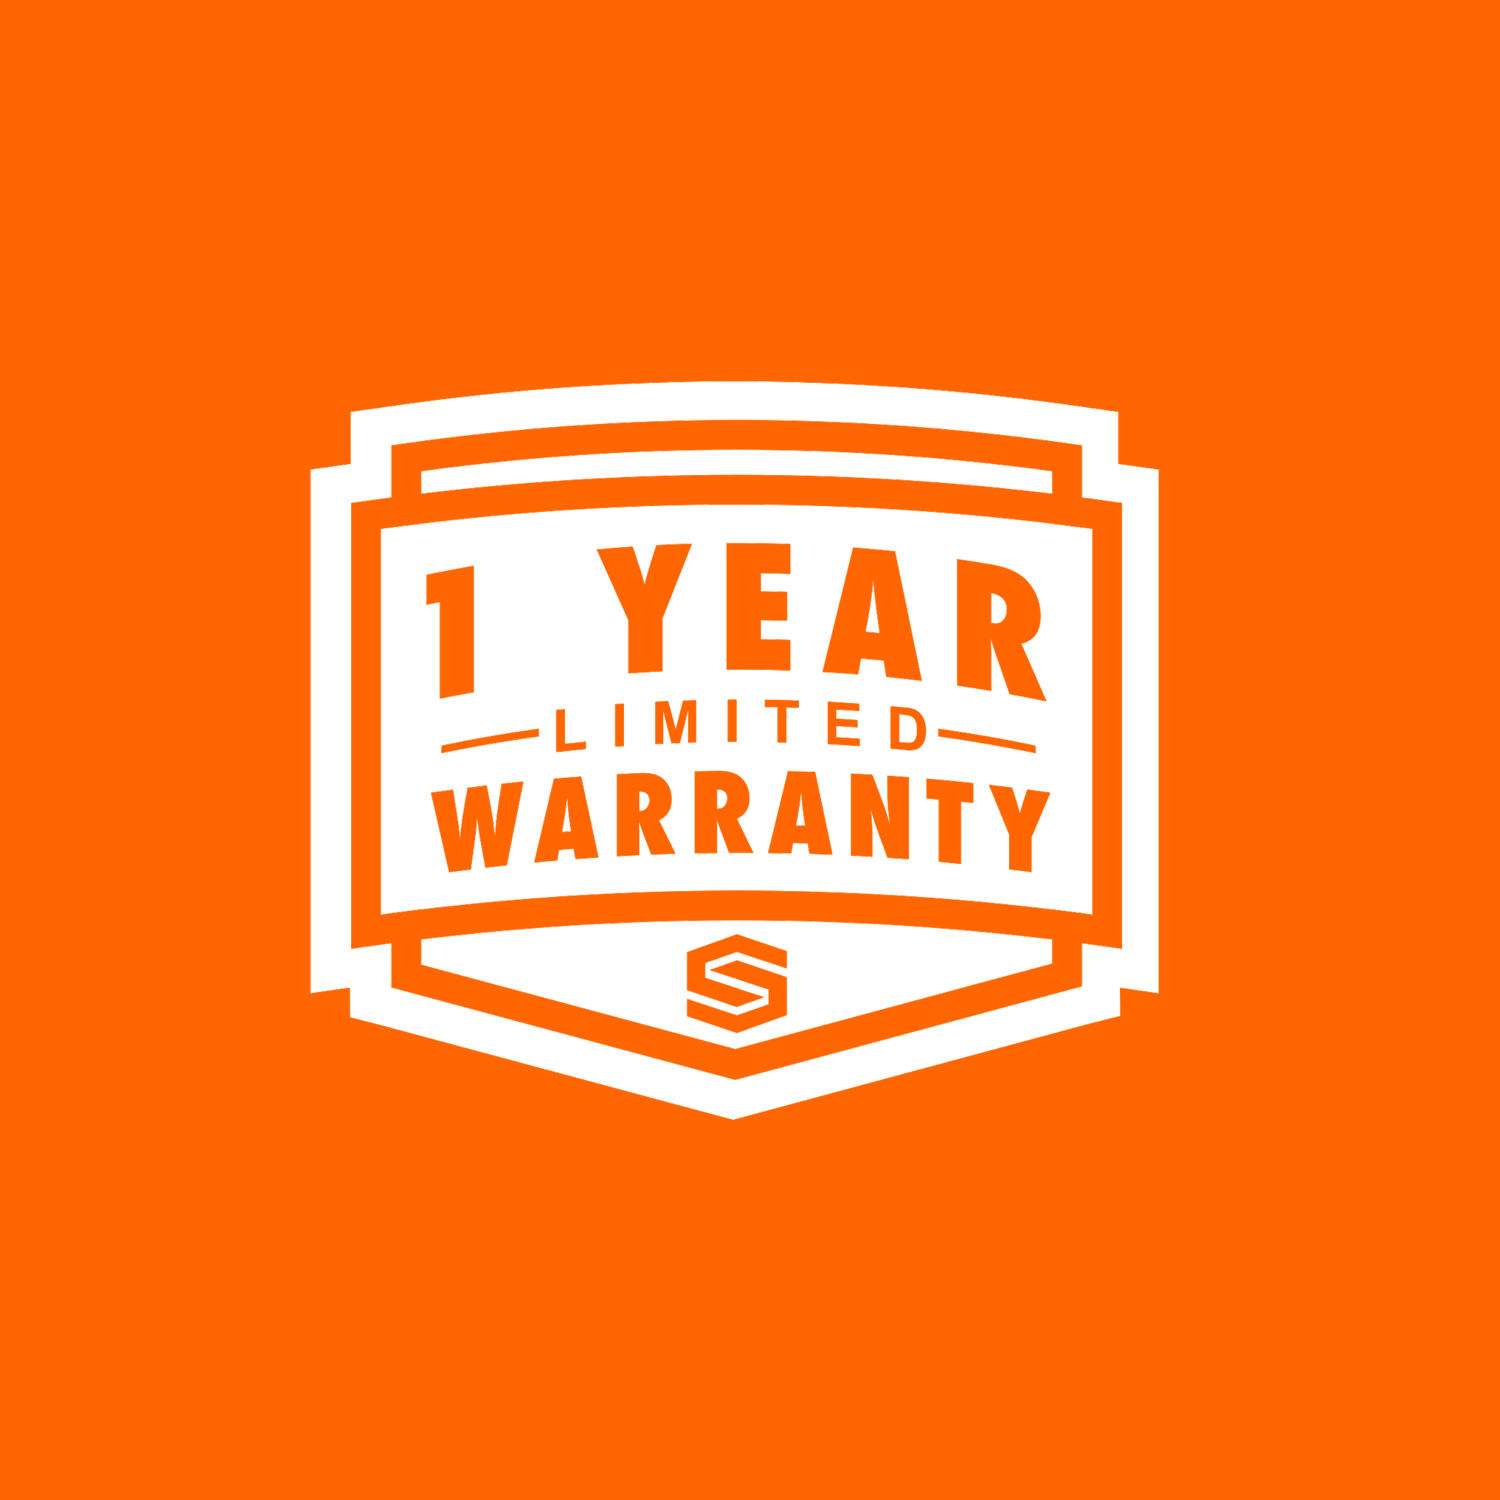 Drywall Stilts Warranty - 1 Year Limited Warranty backed by The Forest Group